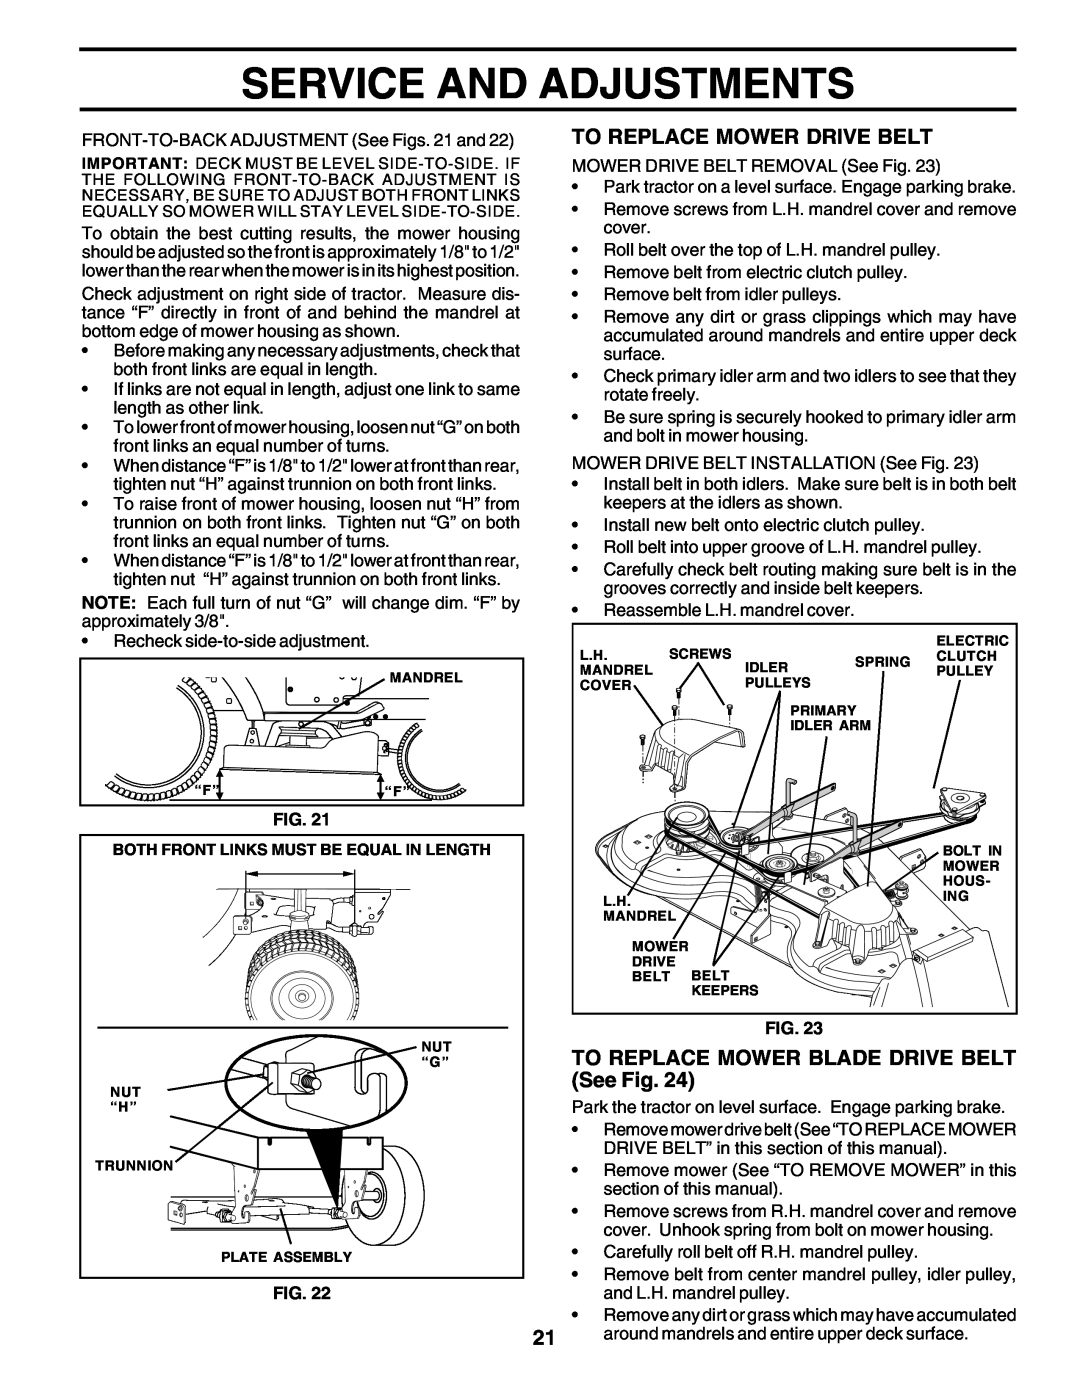 Poulan PRGT22H50C Service And Adjustments, To Replace Mower Drive Belt, TO REPLACE MOWER BLADE DRIVE BELT See Fig 